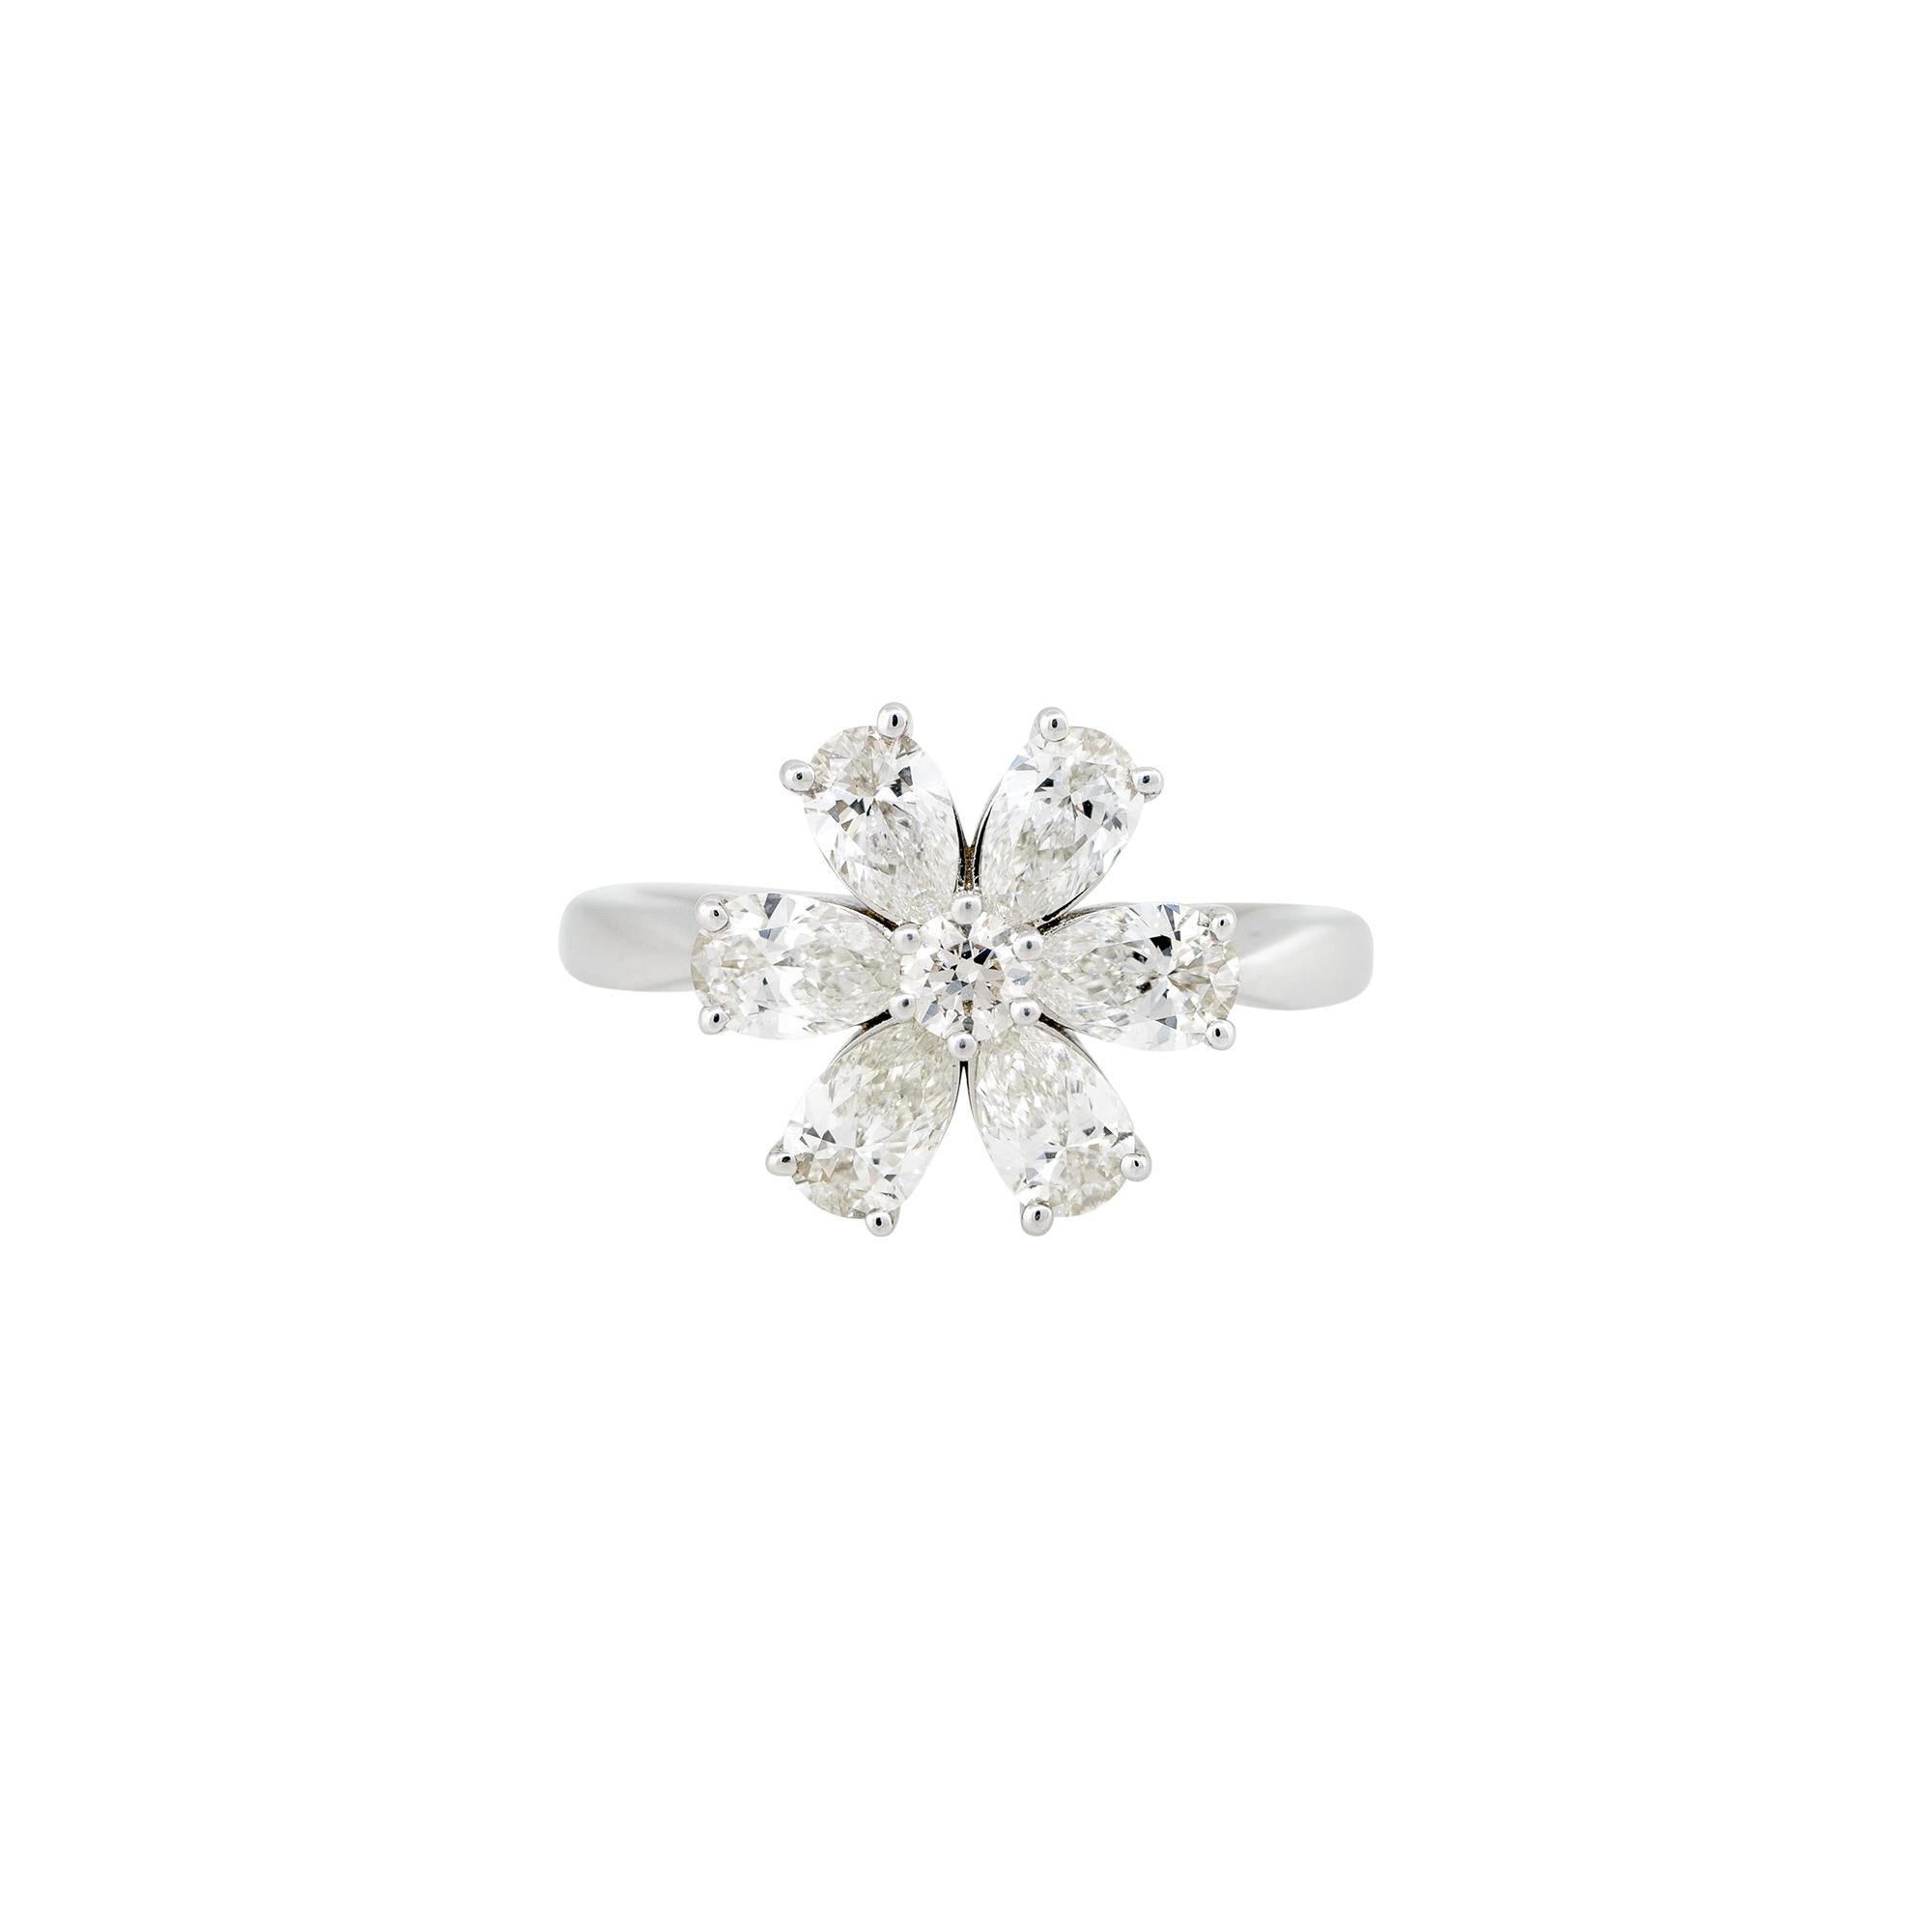 18k White Gold 1.60ctw Pear Shaped Diamond Flower Ring
Style: Women's Diamond Flower Ring
Material: 18k White Gold
Main Diamond Details: Approximately 1.60ctw of Pear Shaped and Round Brilliant Cut Diamonds. There are 6 Pear Shaped stones and 1